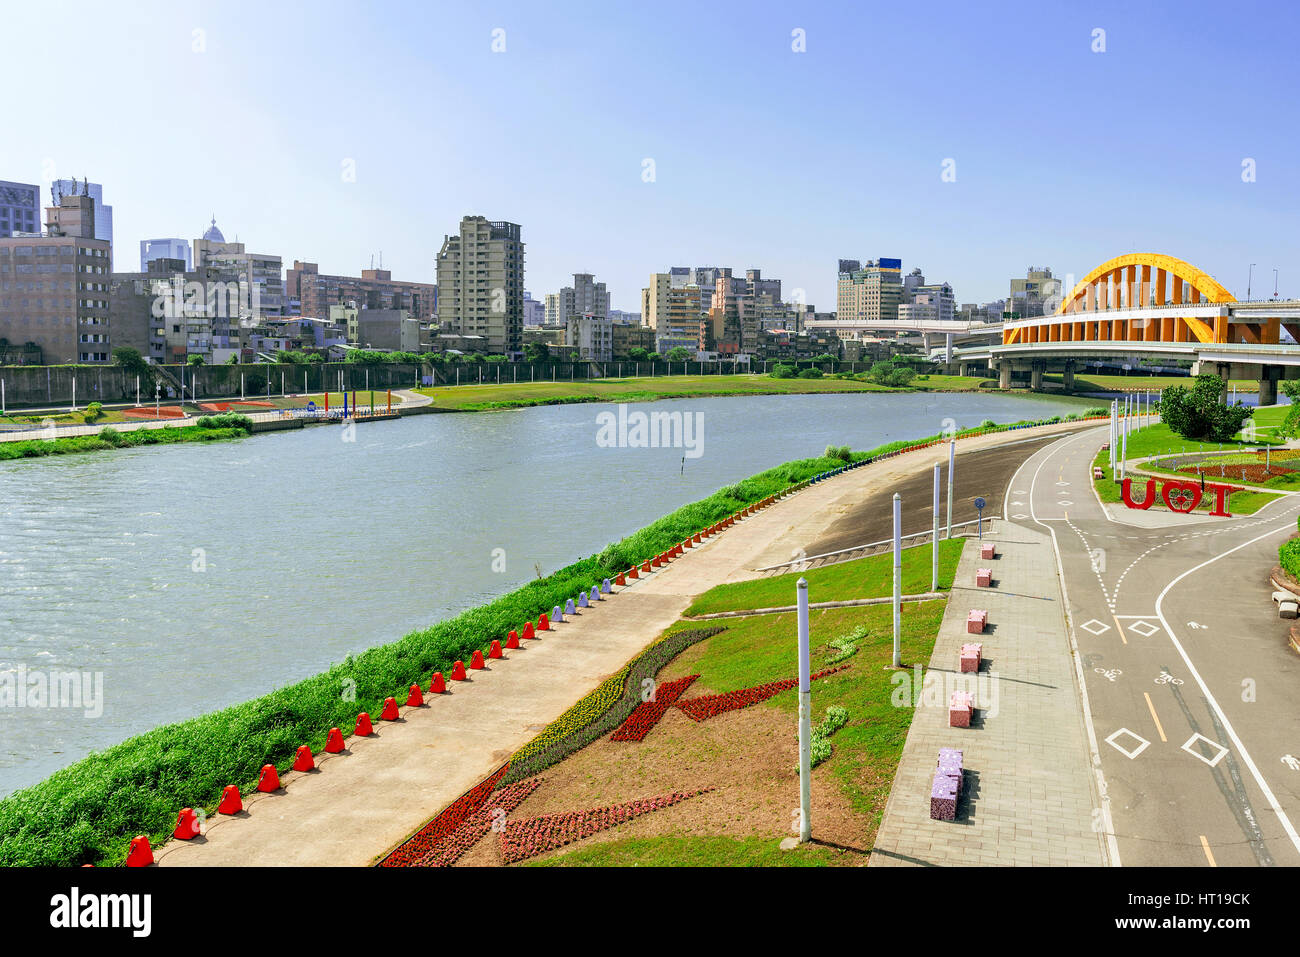 Cityscape of Taipei riverside park area and the Keelung river Stock Photo